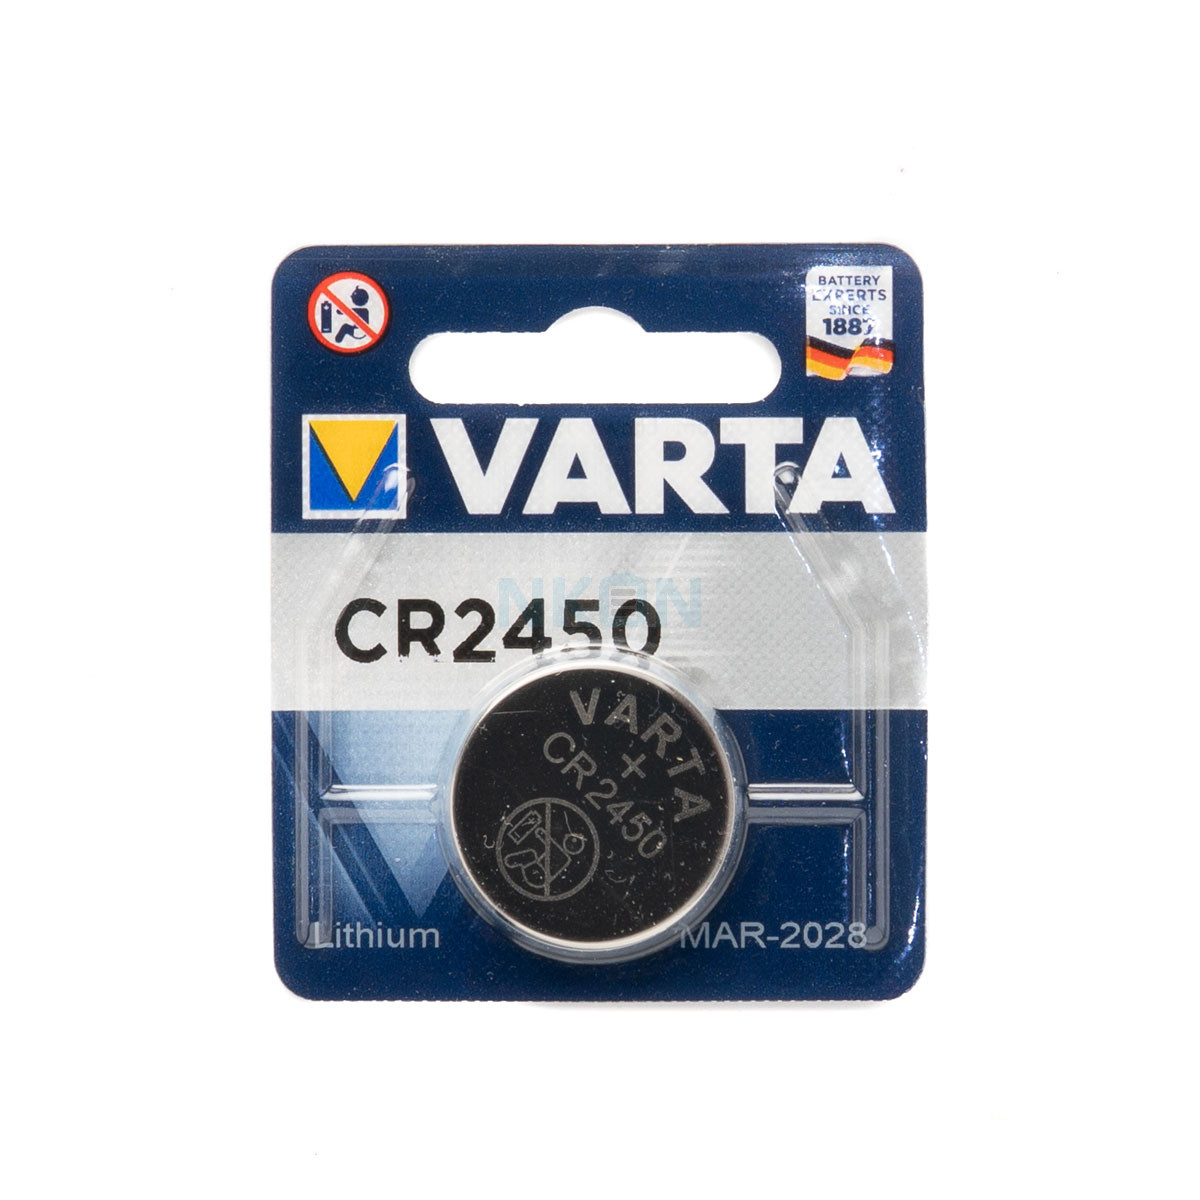 Varta CR2450 - 3V - Button cell & other sizes - Lithium